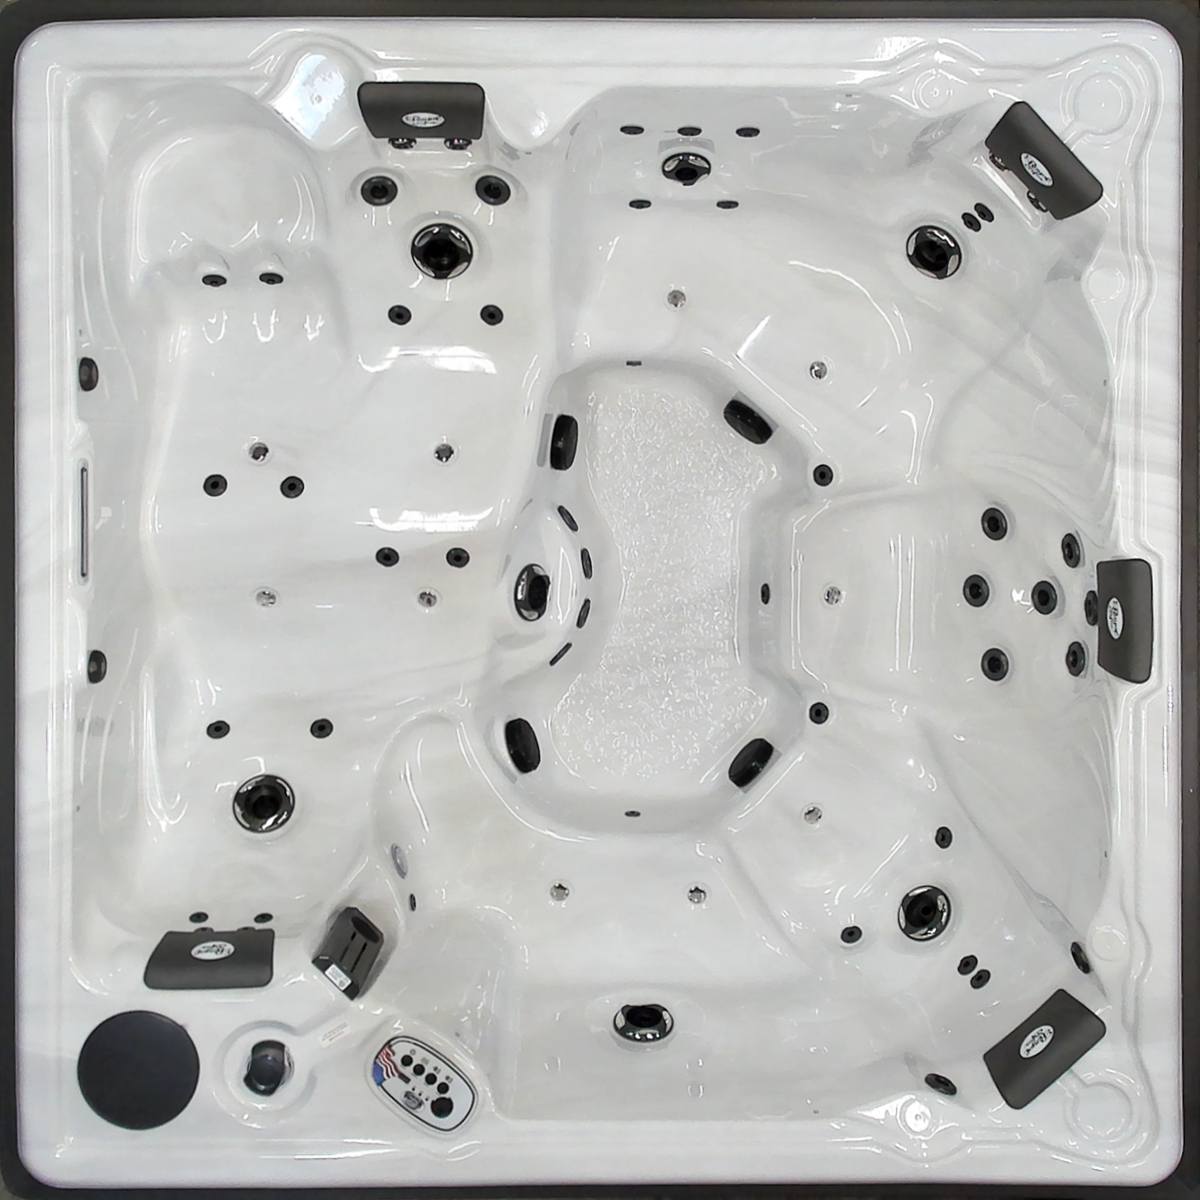 The Emperor II Hot Tub from Royal Spa (Marble)